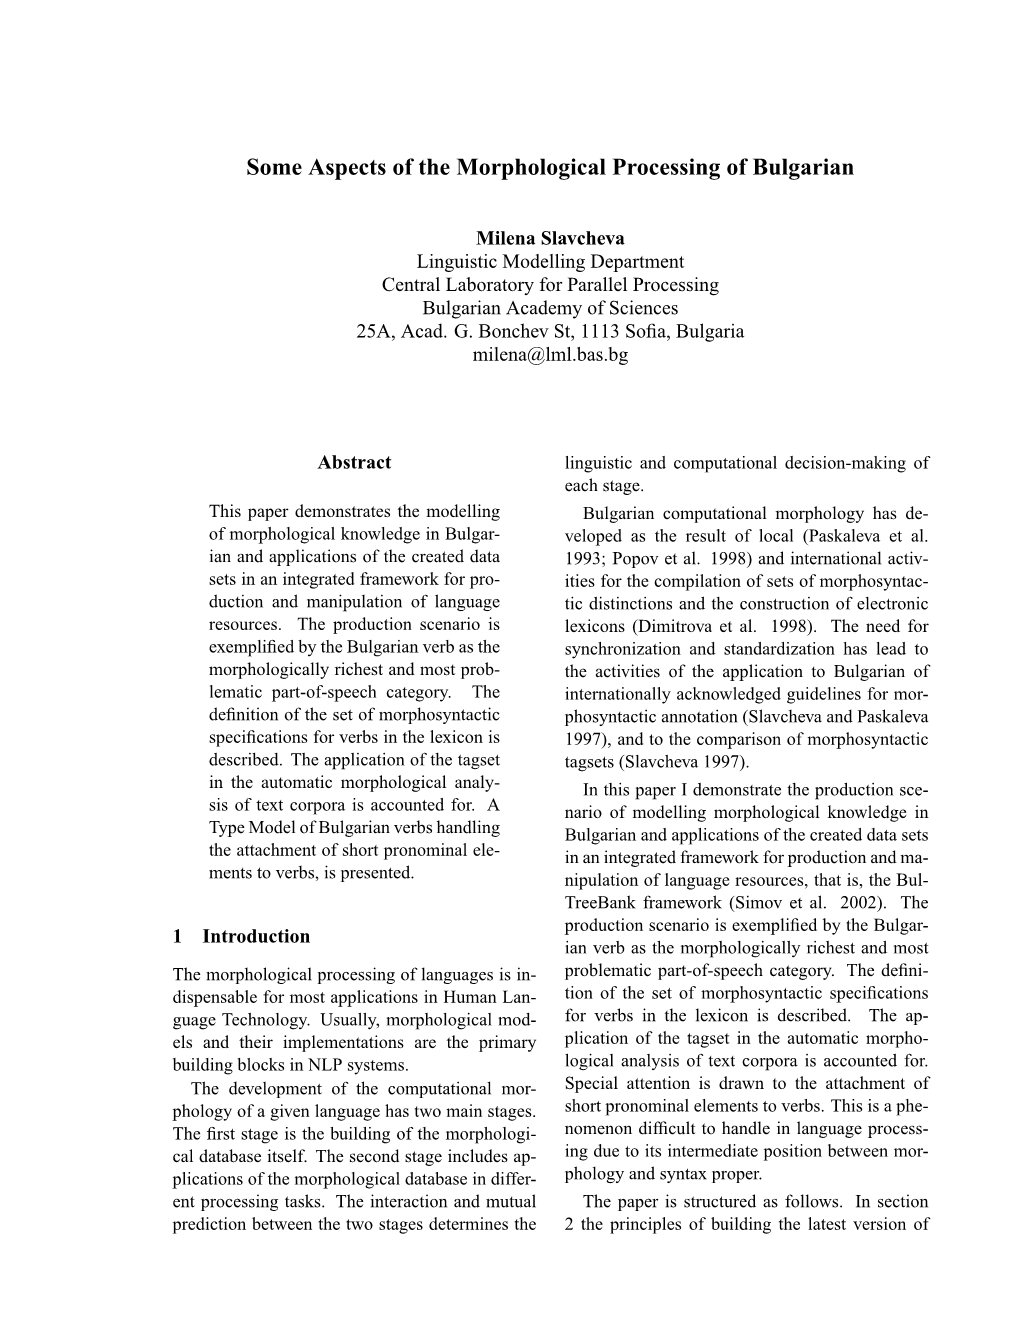 Some Aspects of the Morphological Processing of Bulgarian